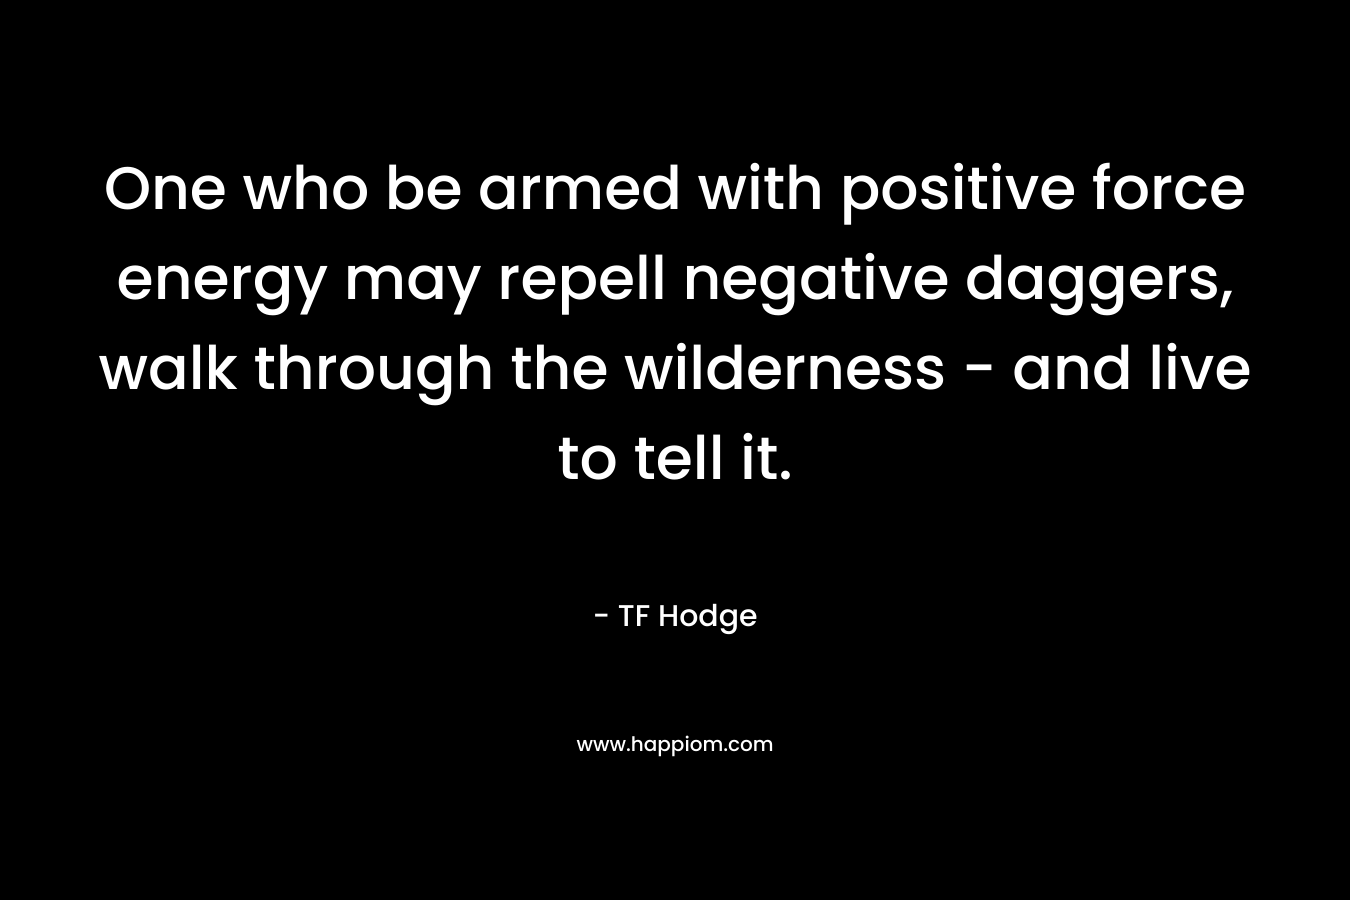 One who be armed with positive force energy may repell negative daggers, walk through the wilderness – and live to tell it. – TF Hodge